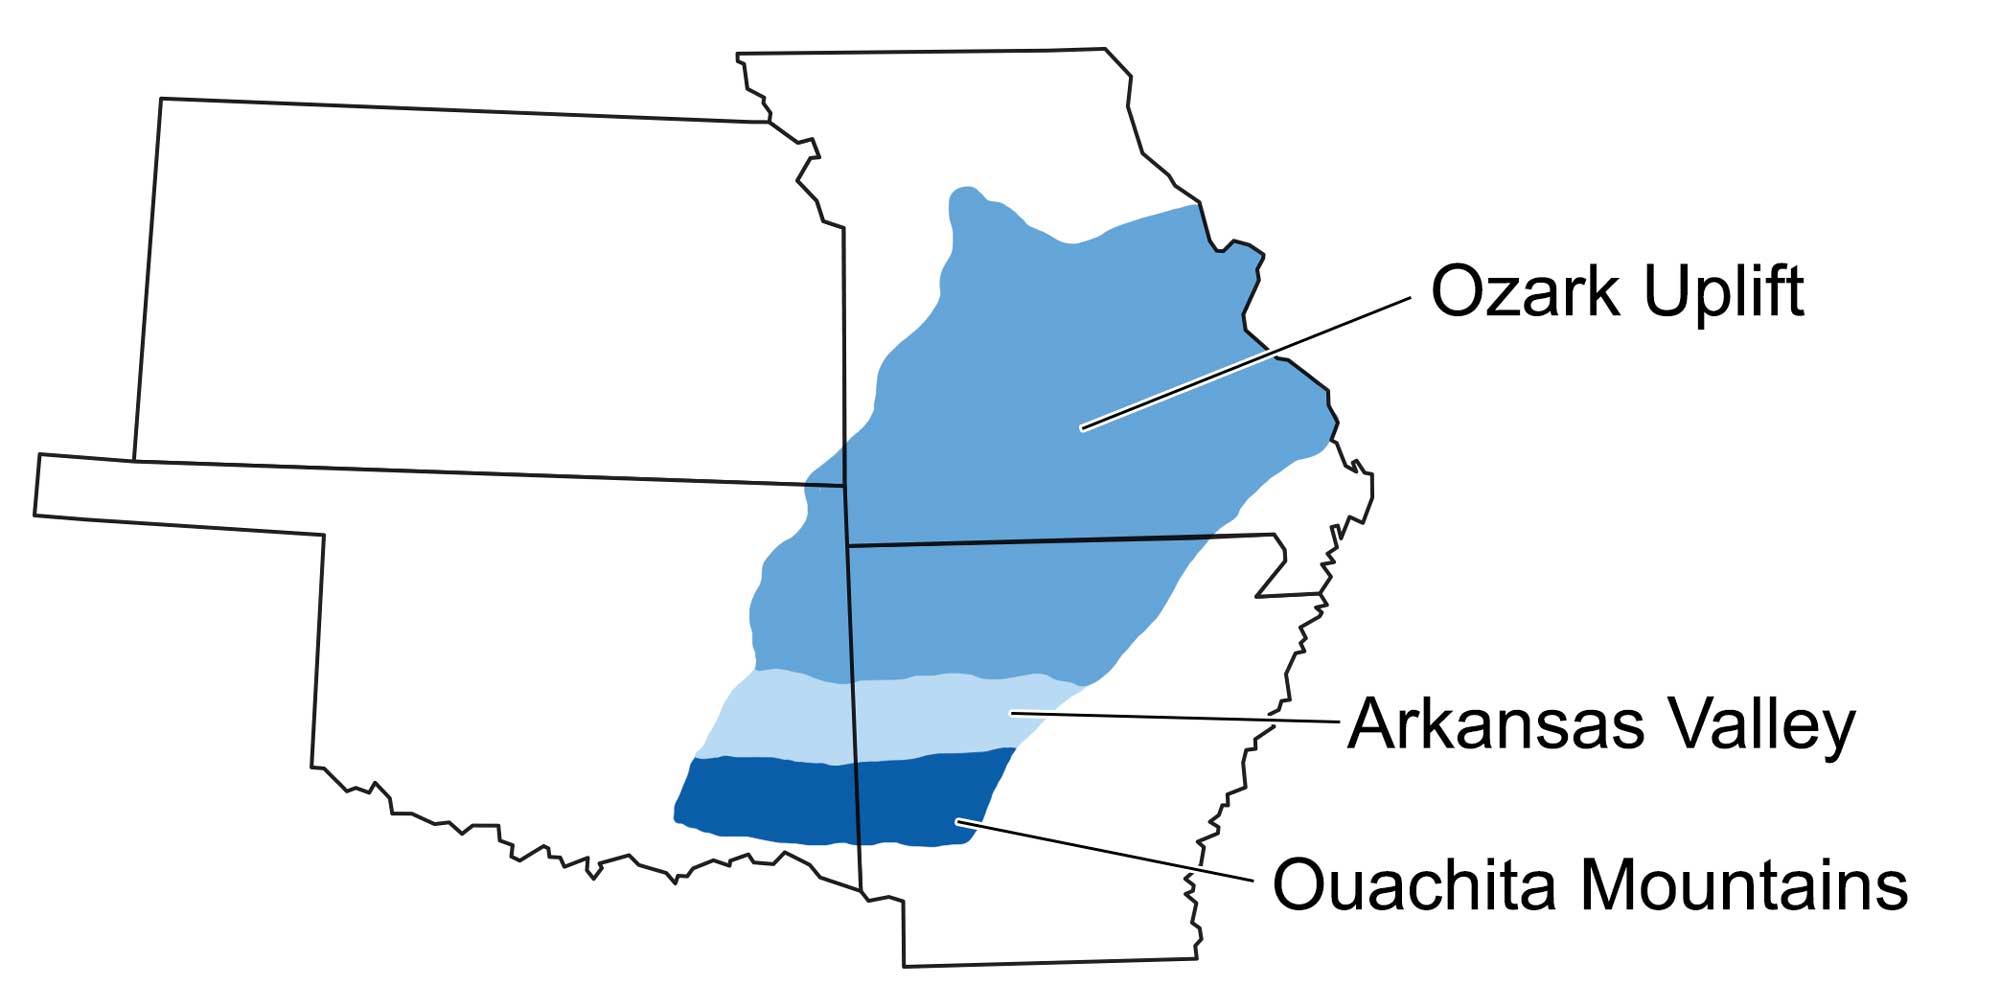 Simple map showing the three major topographic divisions of the Interior Highlands, including the Ozark Uplift, the Arkansas Valley, and the Ouachita Mountains.